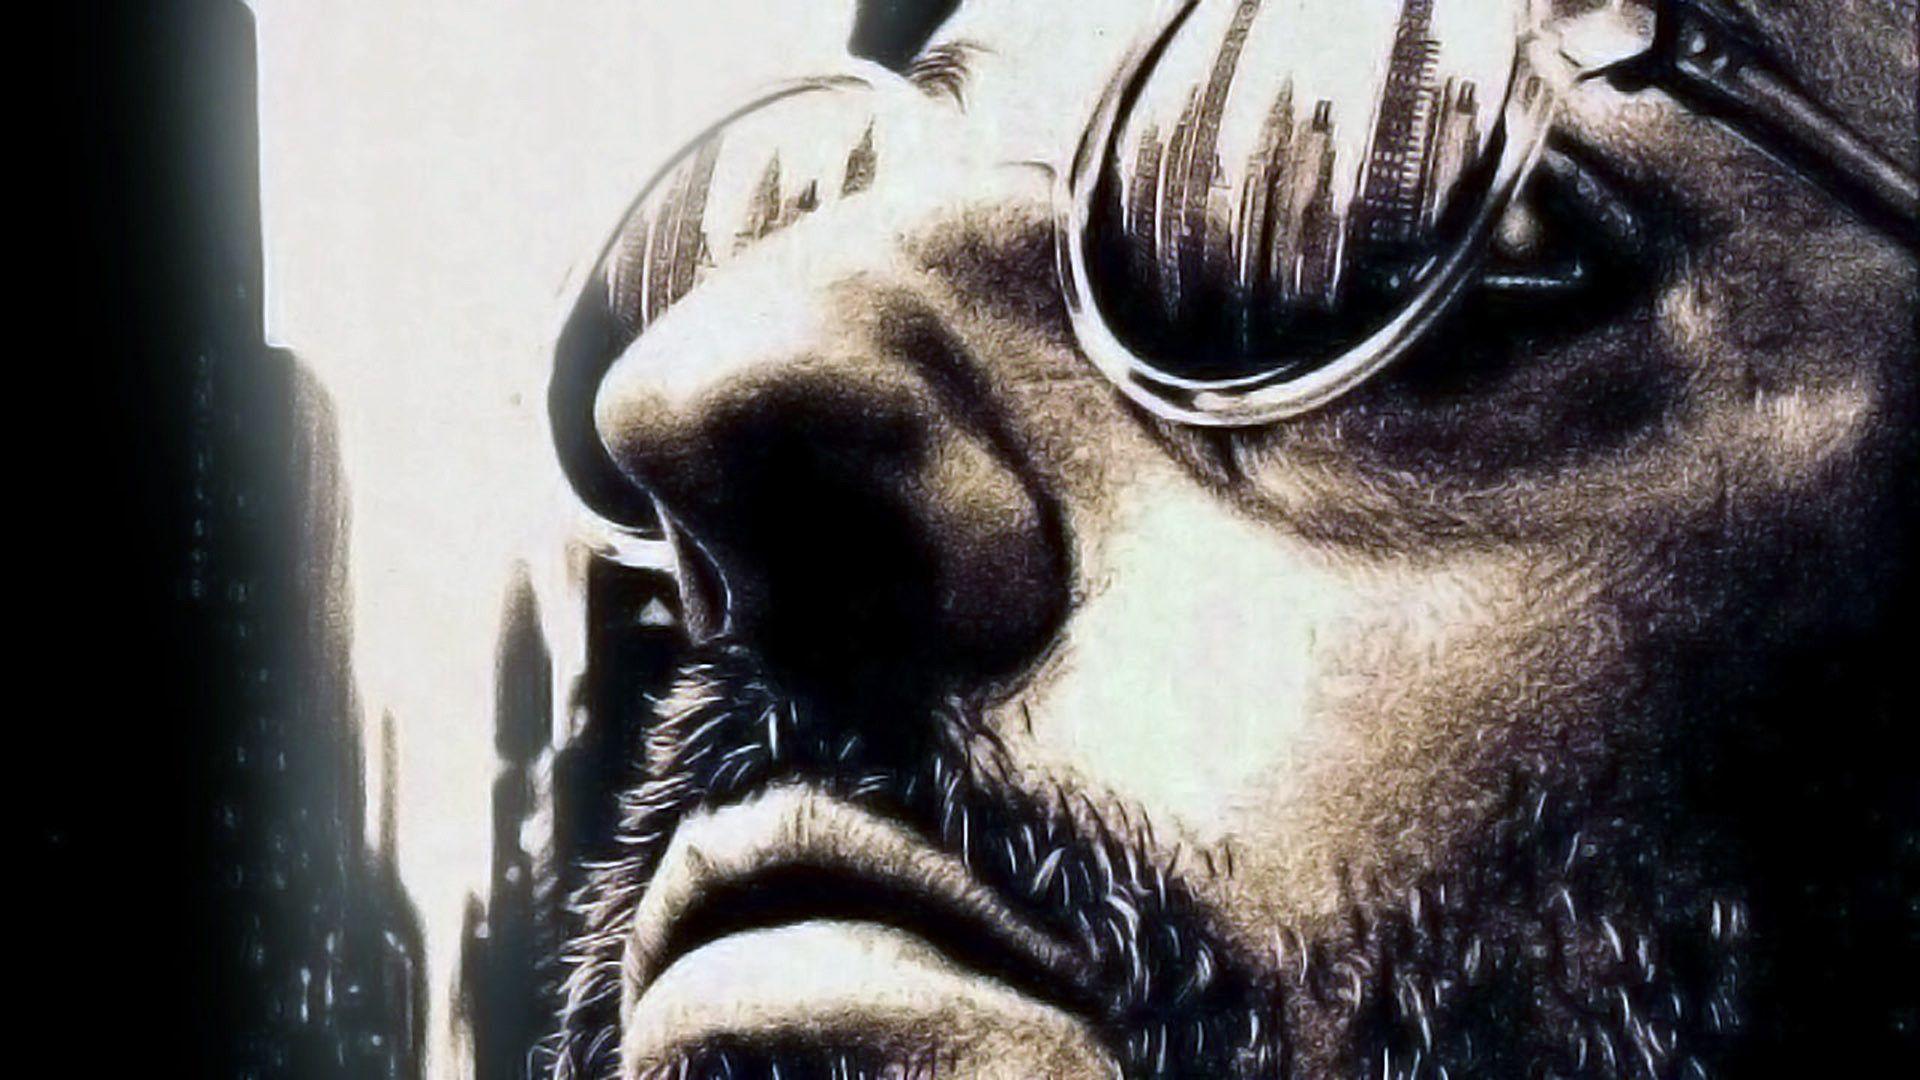 HD Leon The Professional Wallpaper and Photo. HD Movie Wallpaper